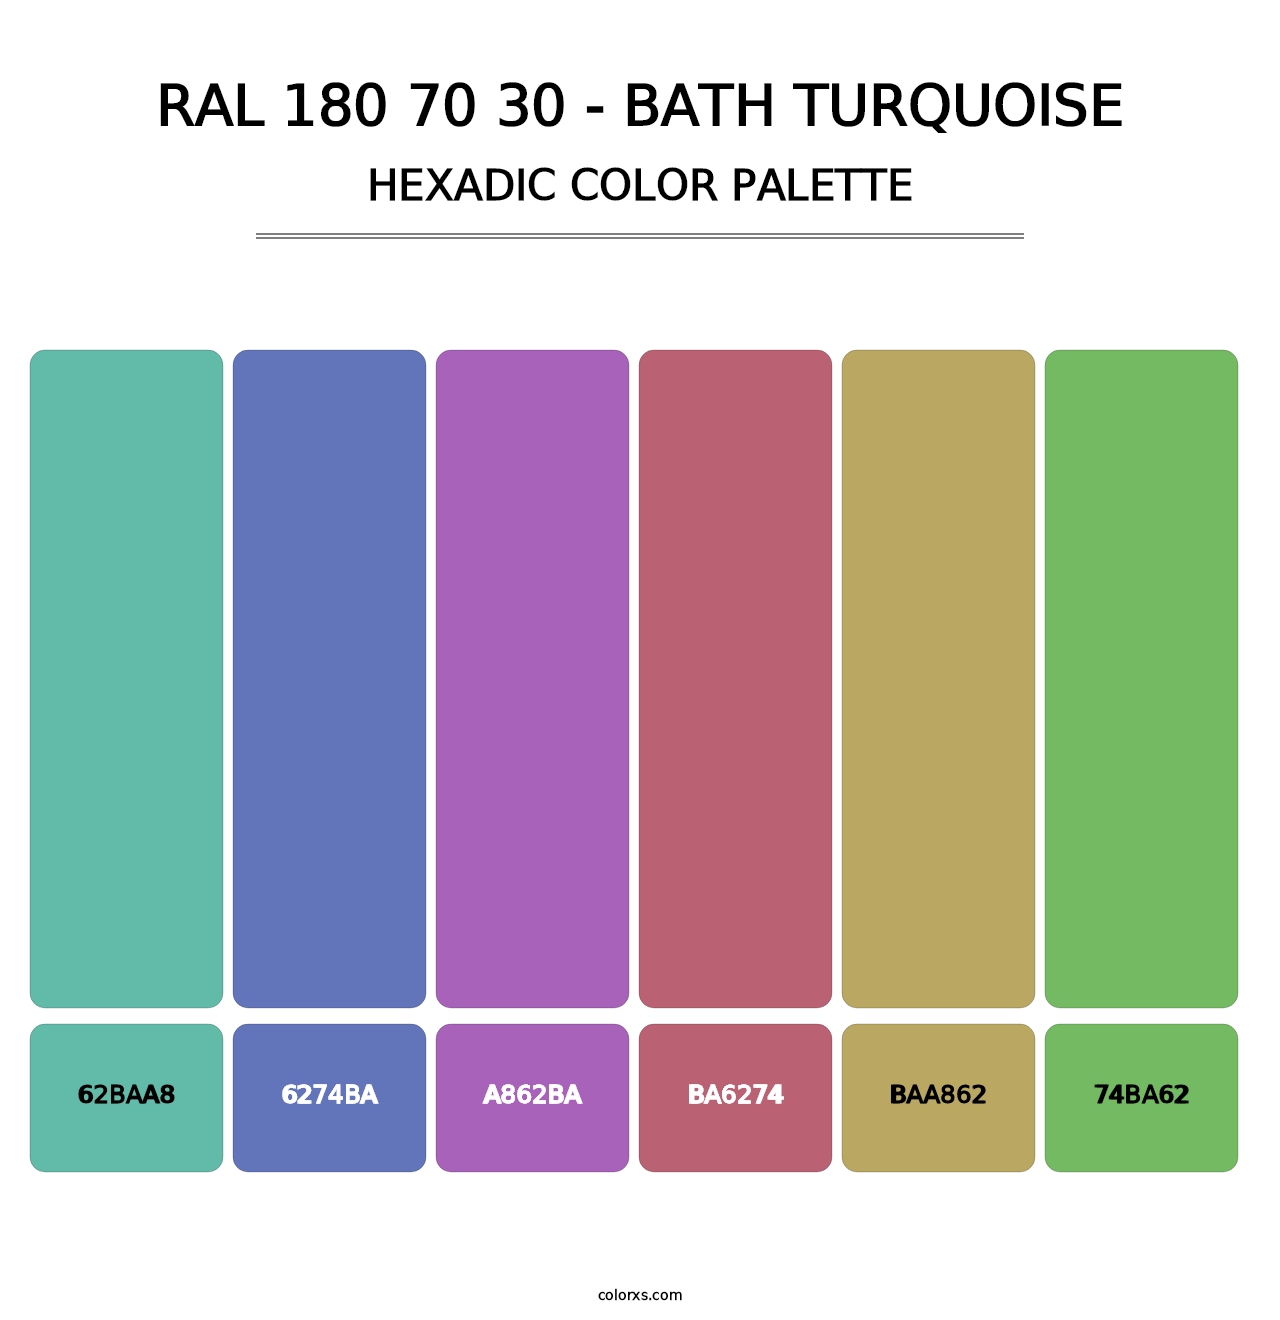 RAL 180 70 30 - Bath Turquoise - Hexadic Color Palette